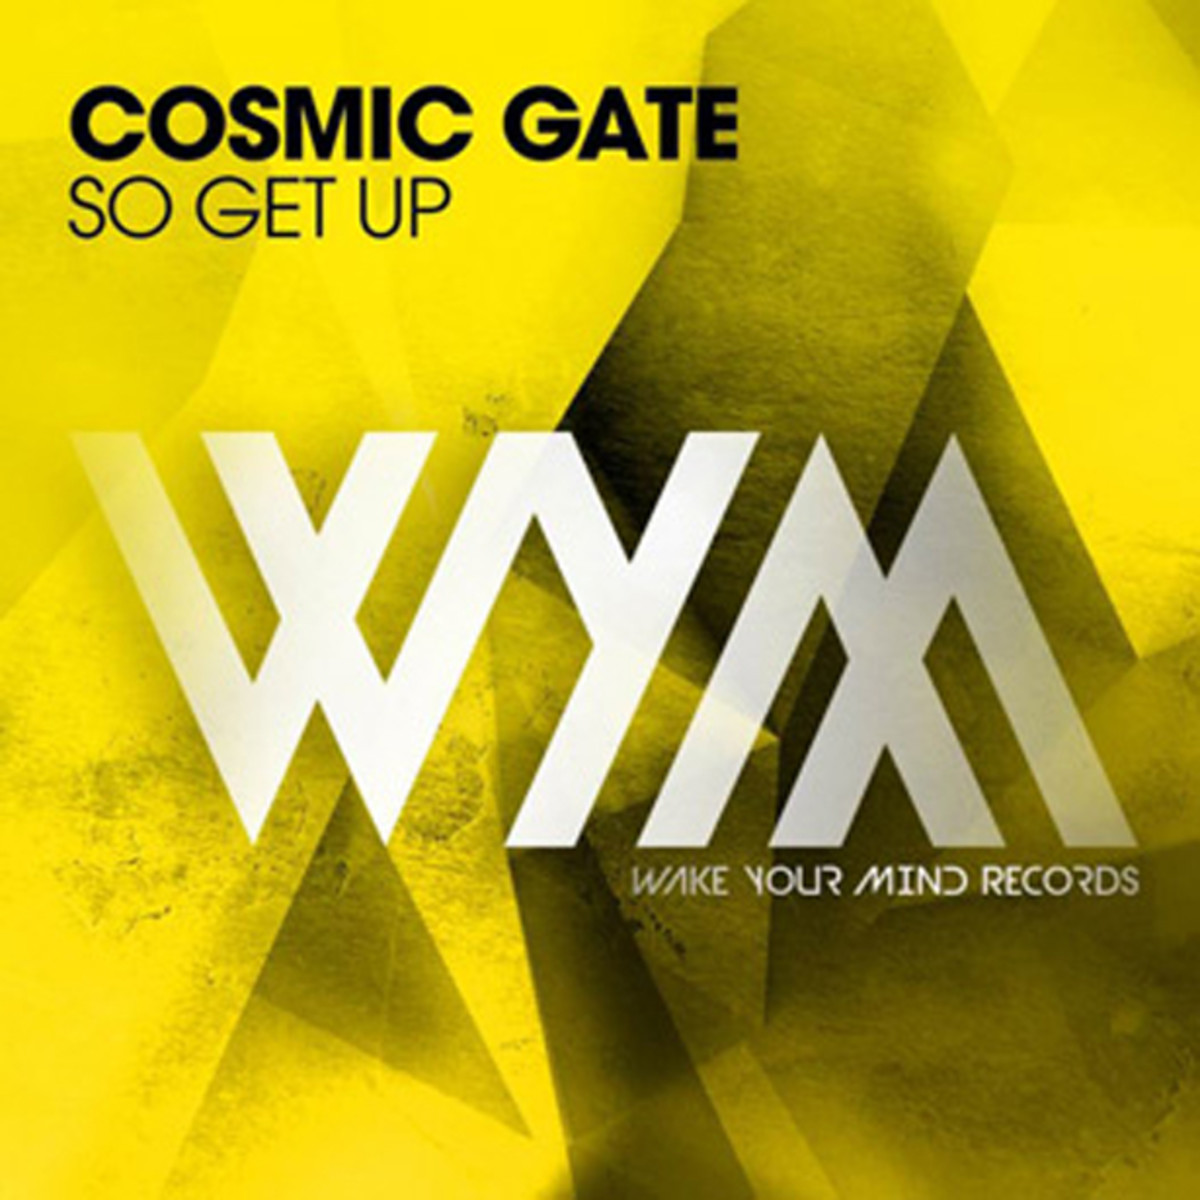 EDM News: "So Get Up" New Electronic Music From Cosmic Gate On Wake Your Mind Records - File Under 'Trance'